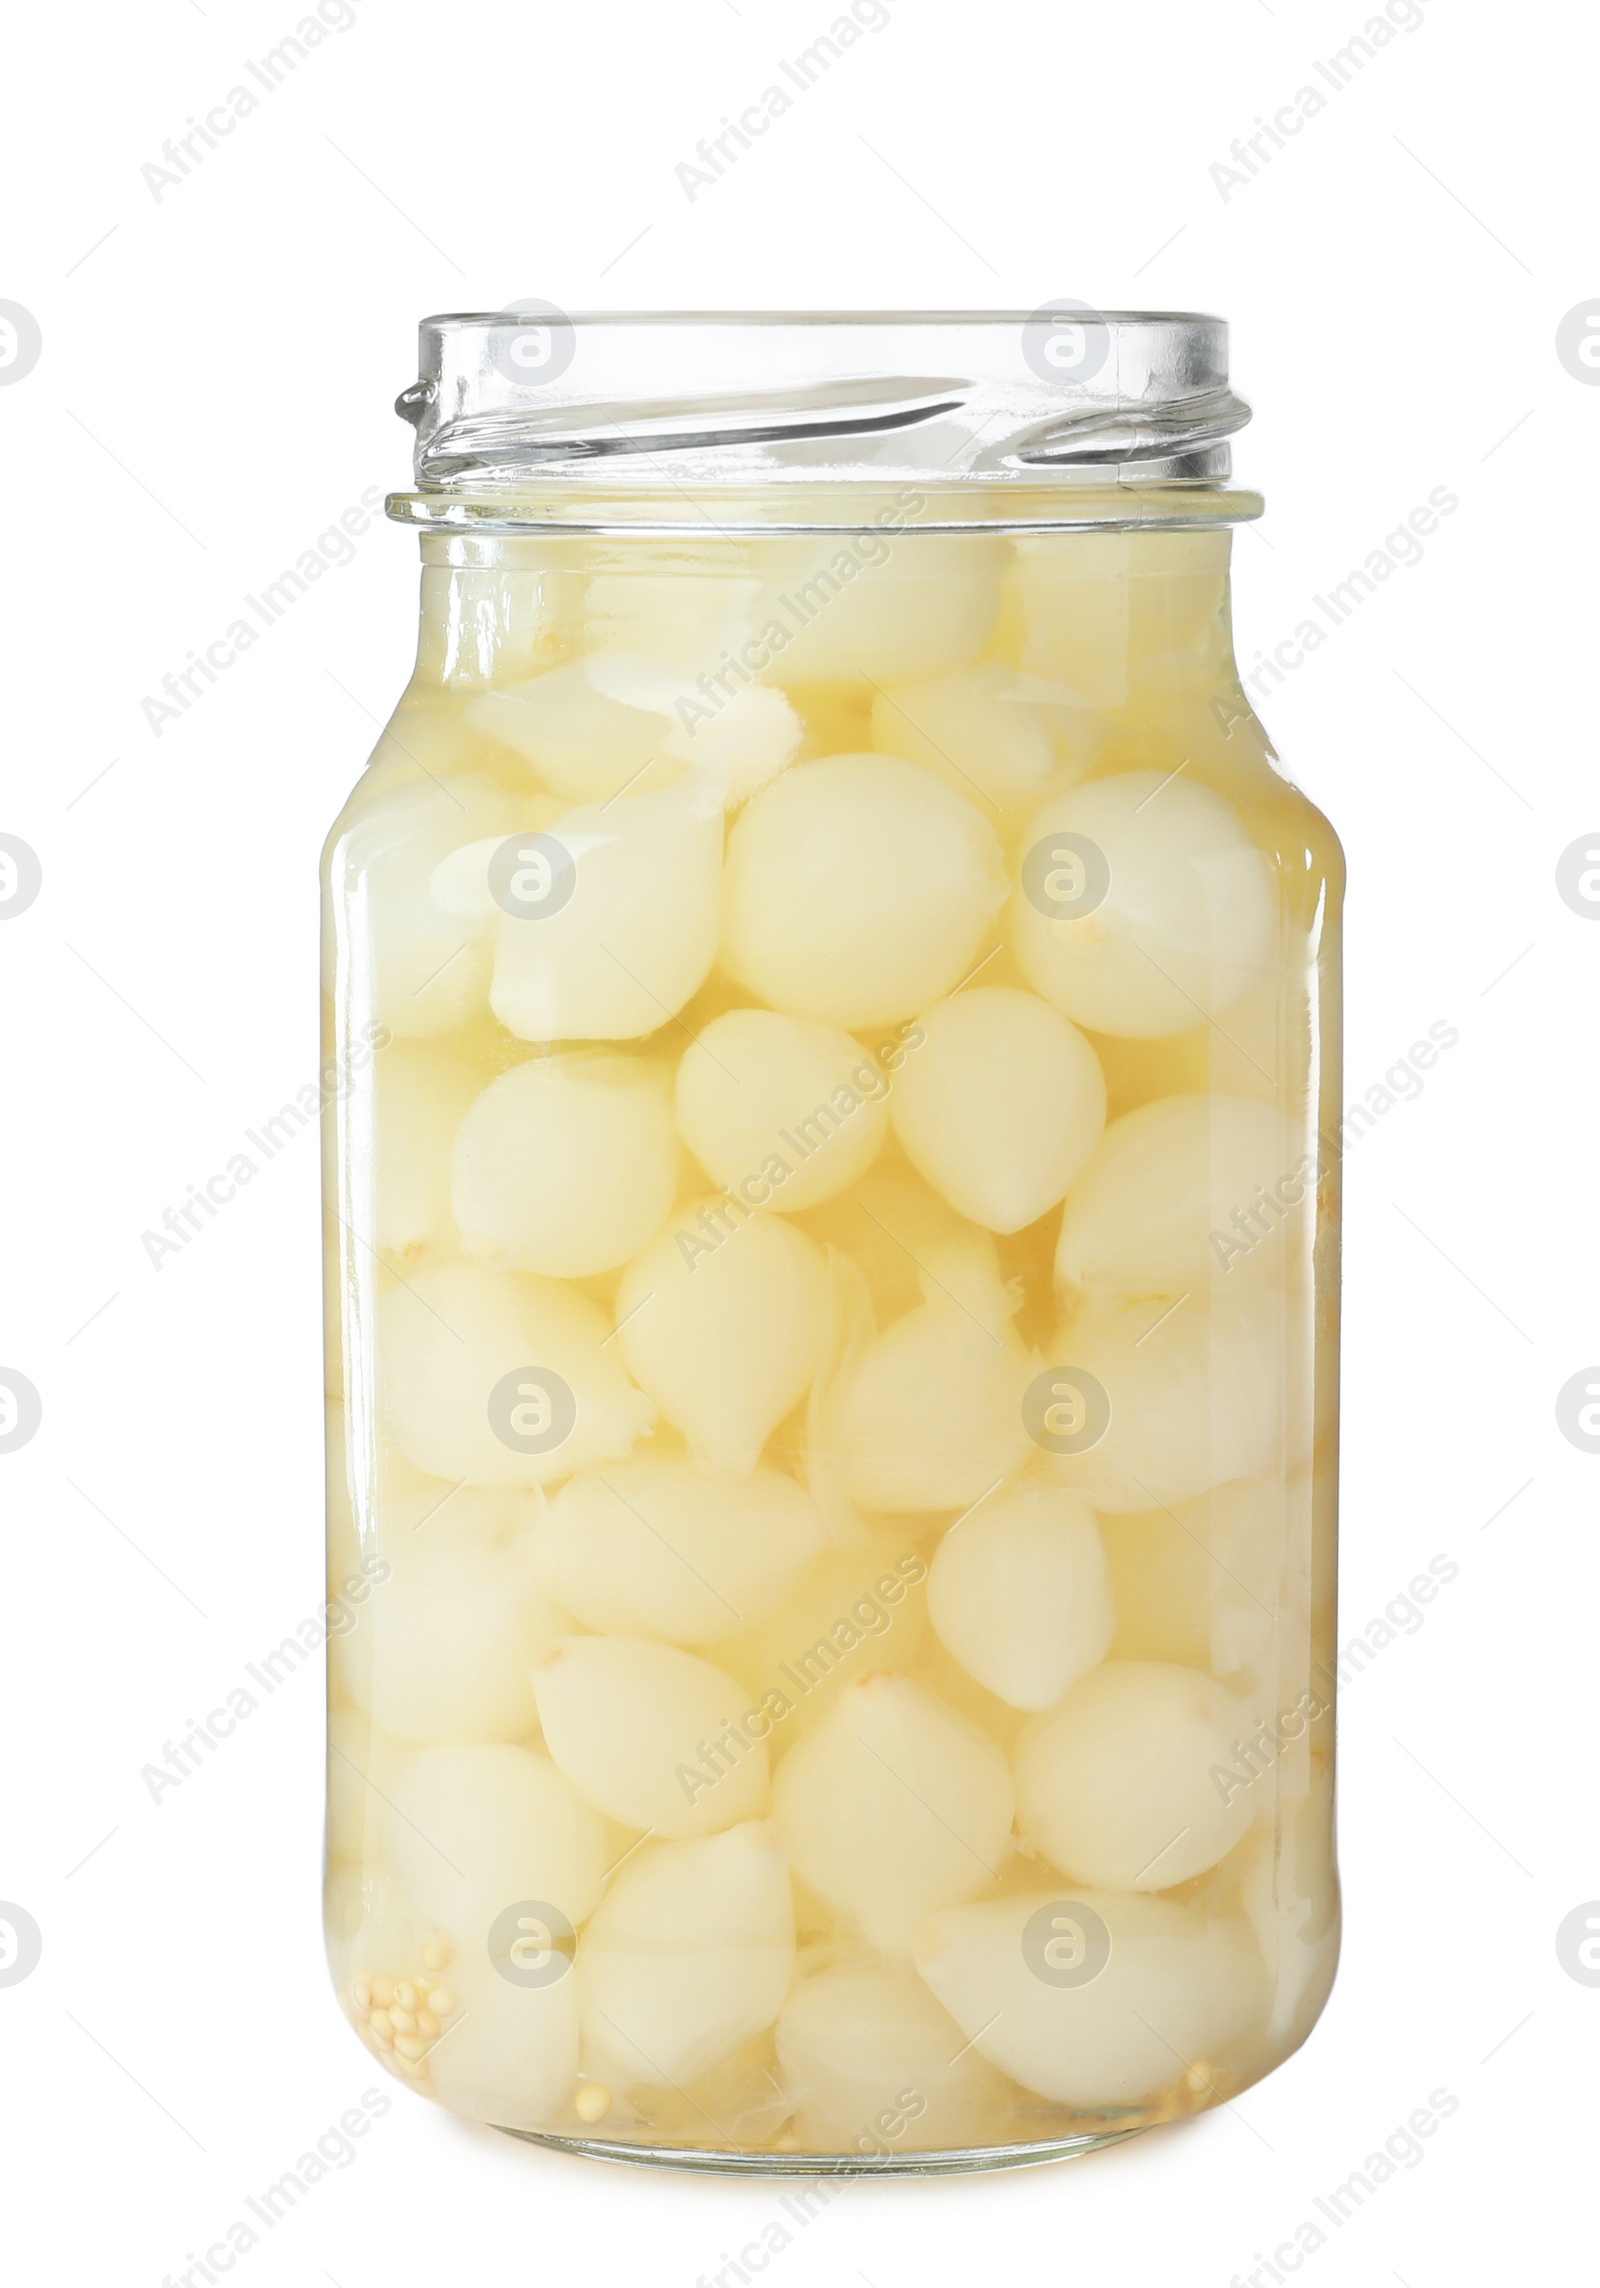 Photo of Jar with pickled onions on white background